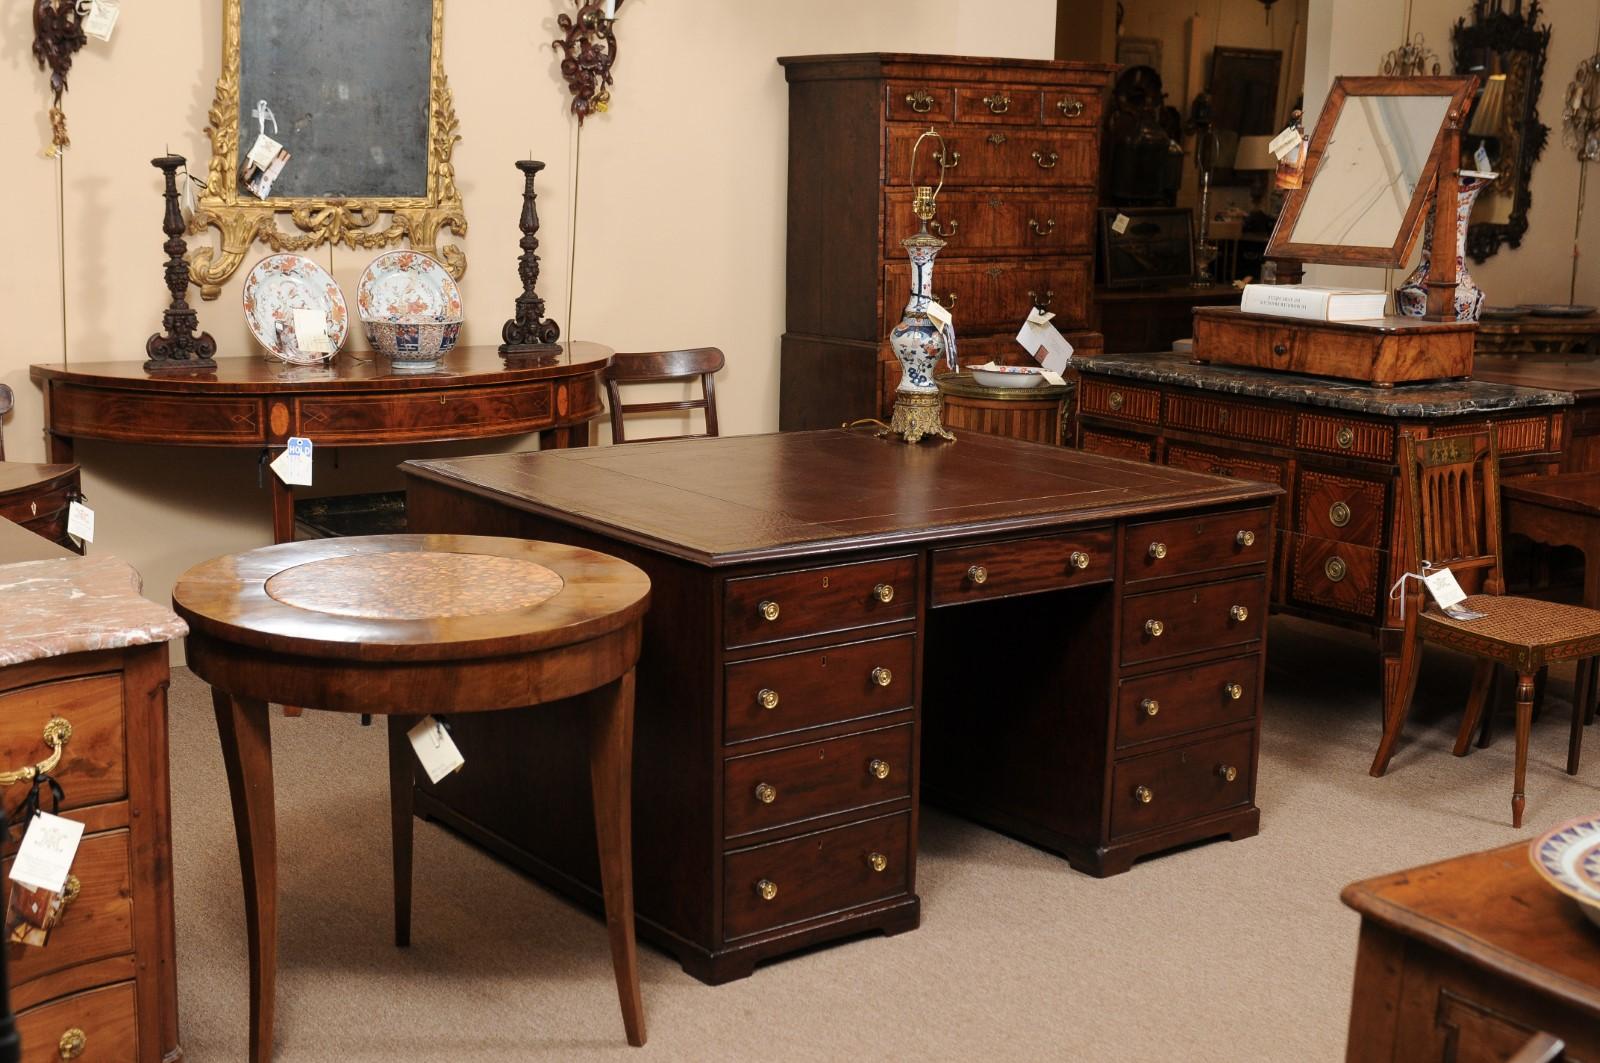 An early 19th century American mahogany partner's pedestal desk featuring embossed brown leather top, moulded edge and 8 drawers below with center knee hole.

 